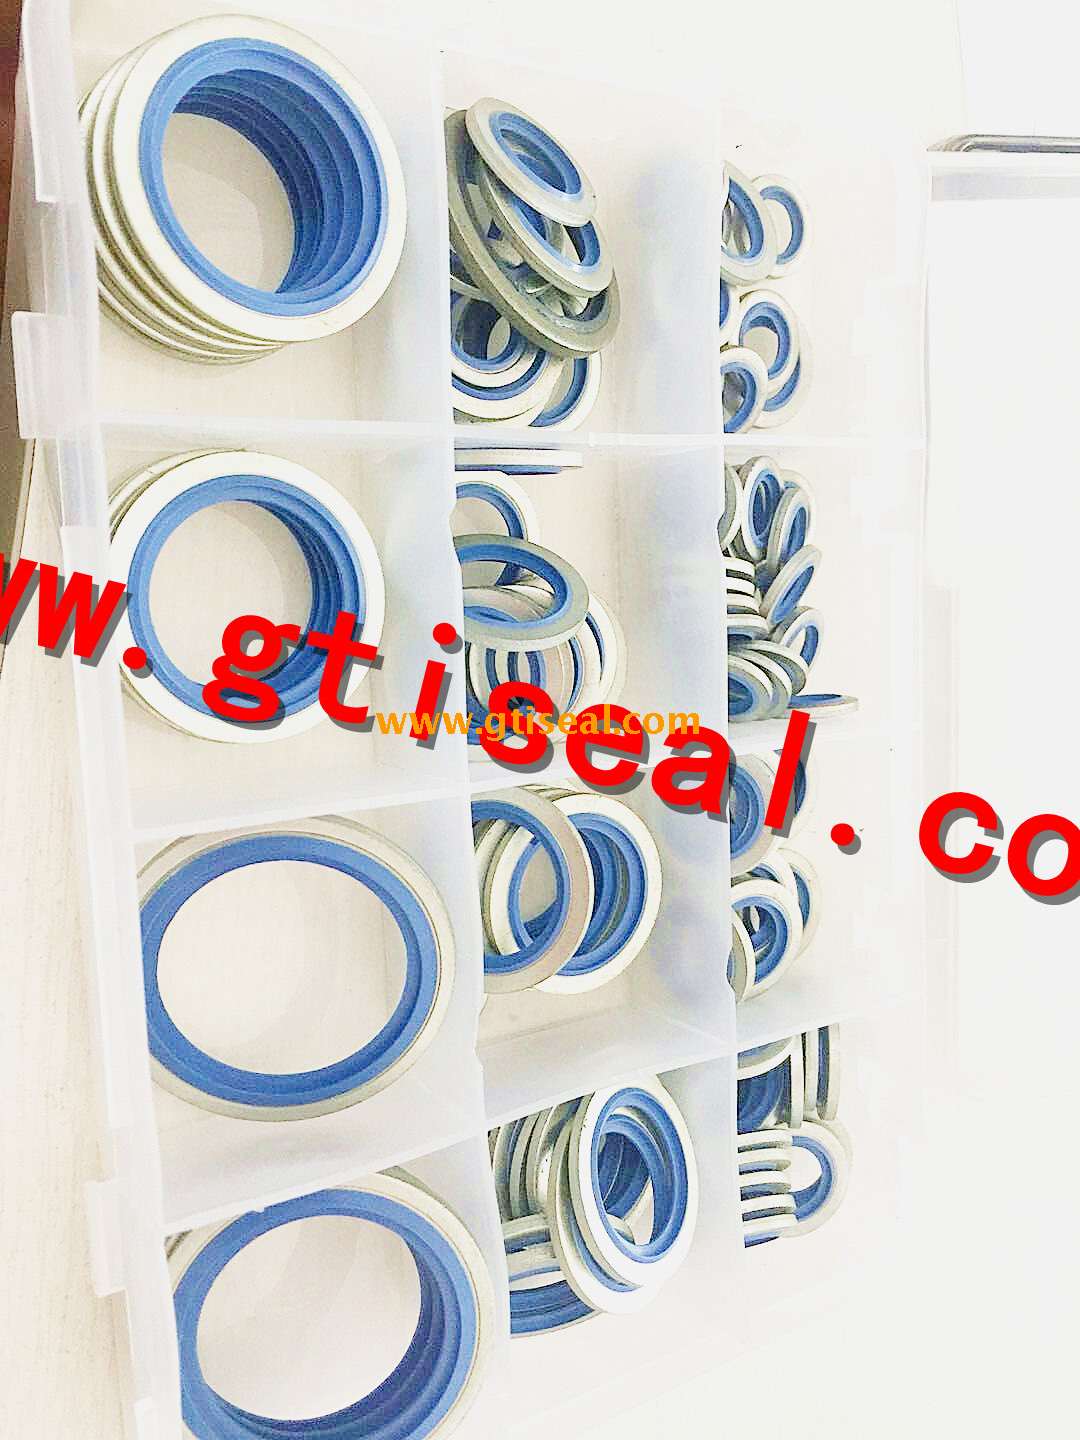 Hydraulic bonded seal washers with self centered